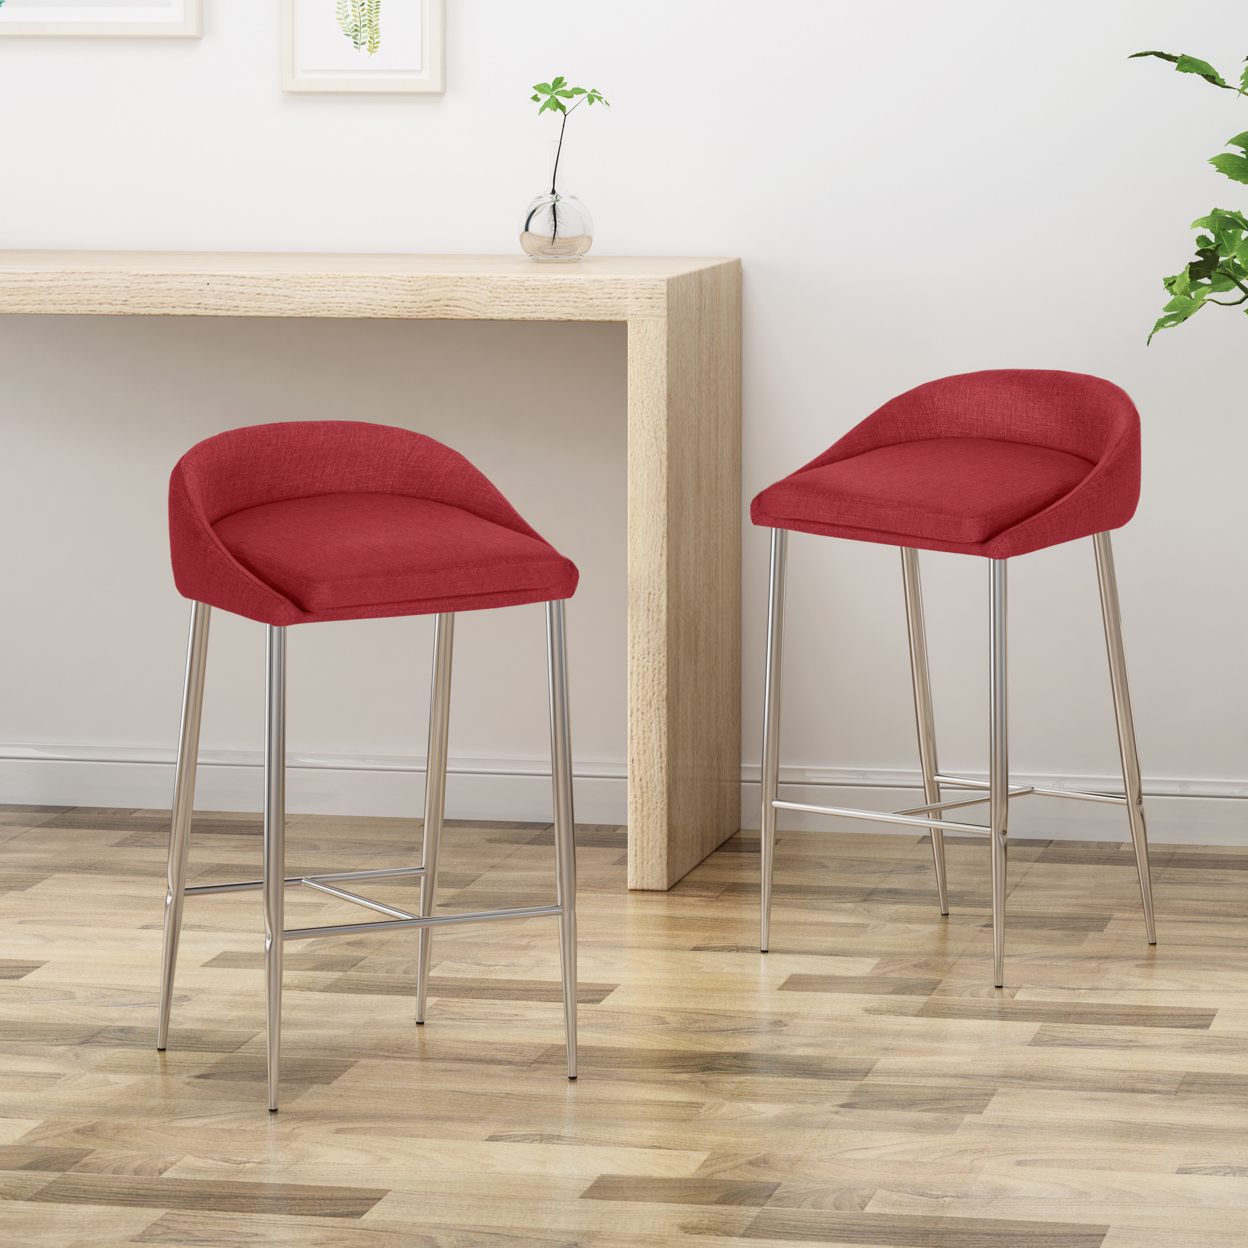 Fanny Upholstered Counter Stools, Modern, Upholstered (Set Of 2) - Red